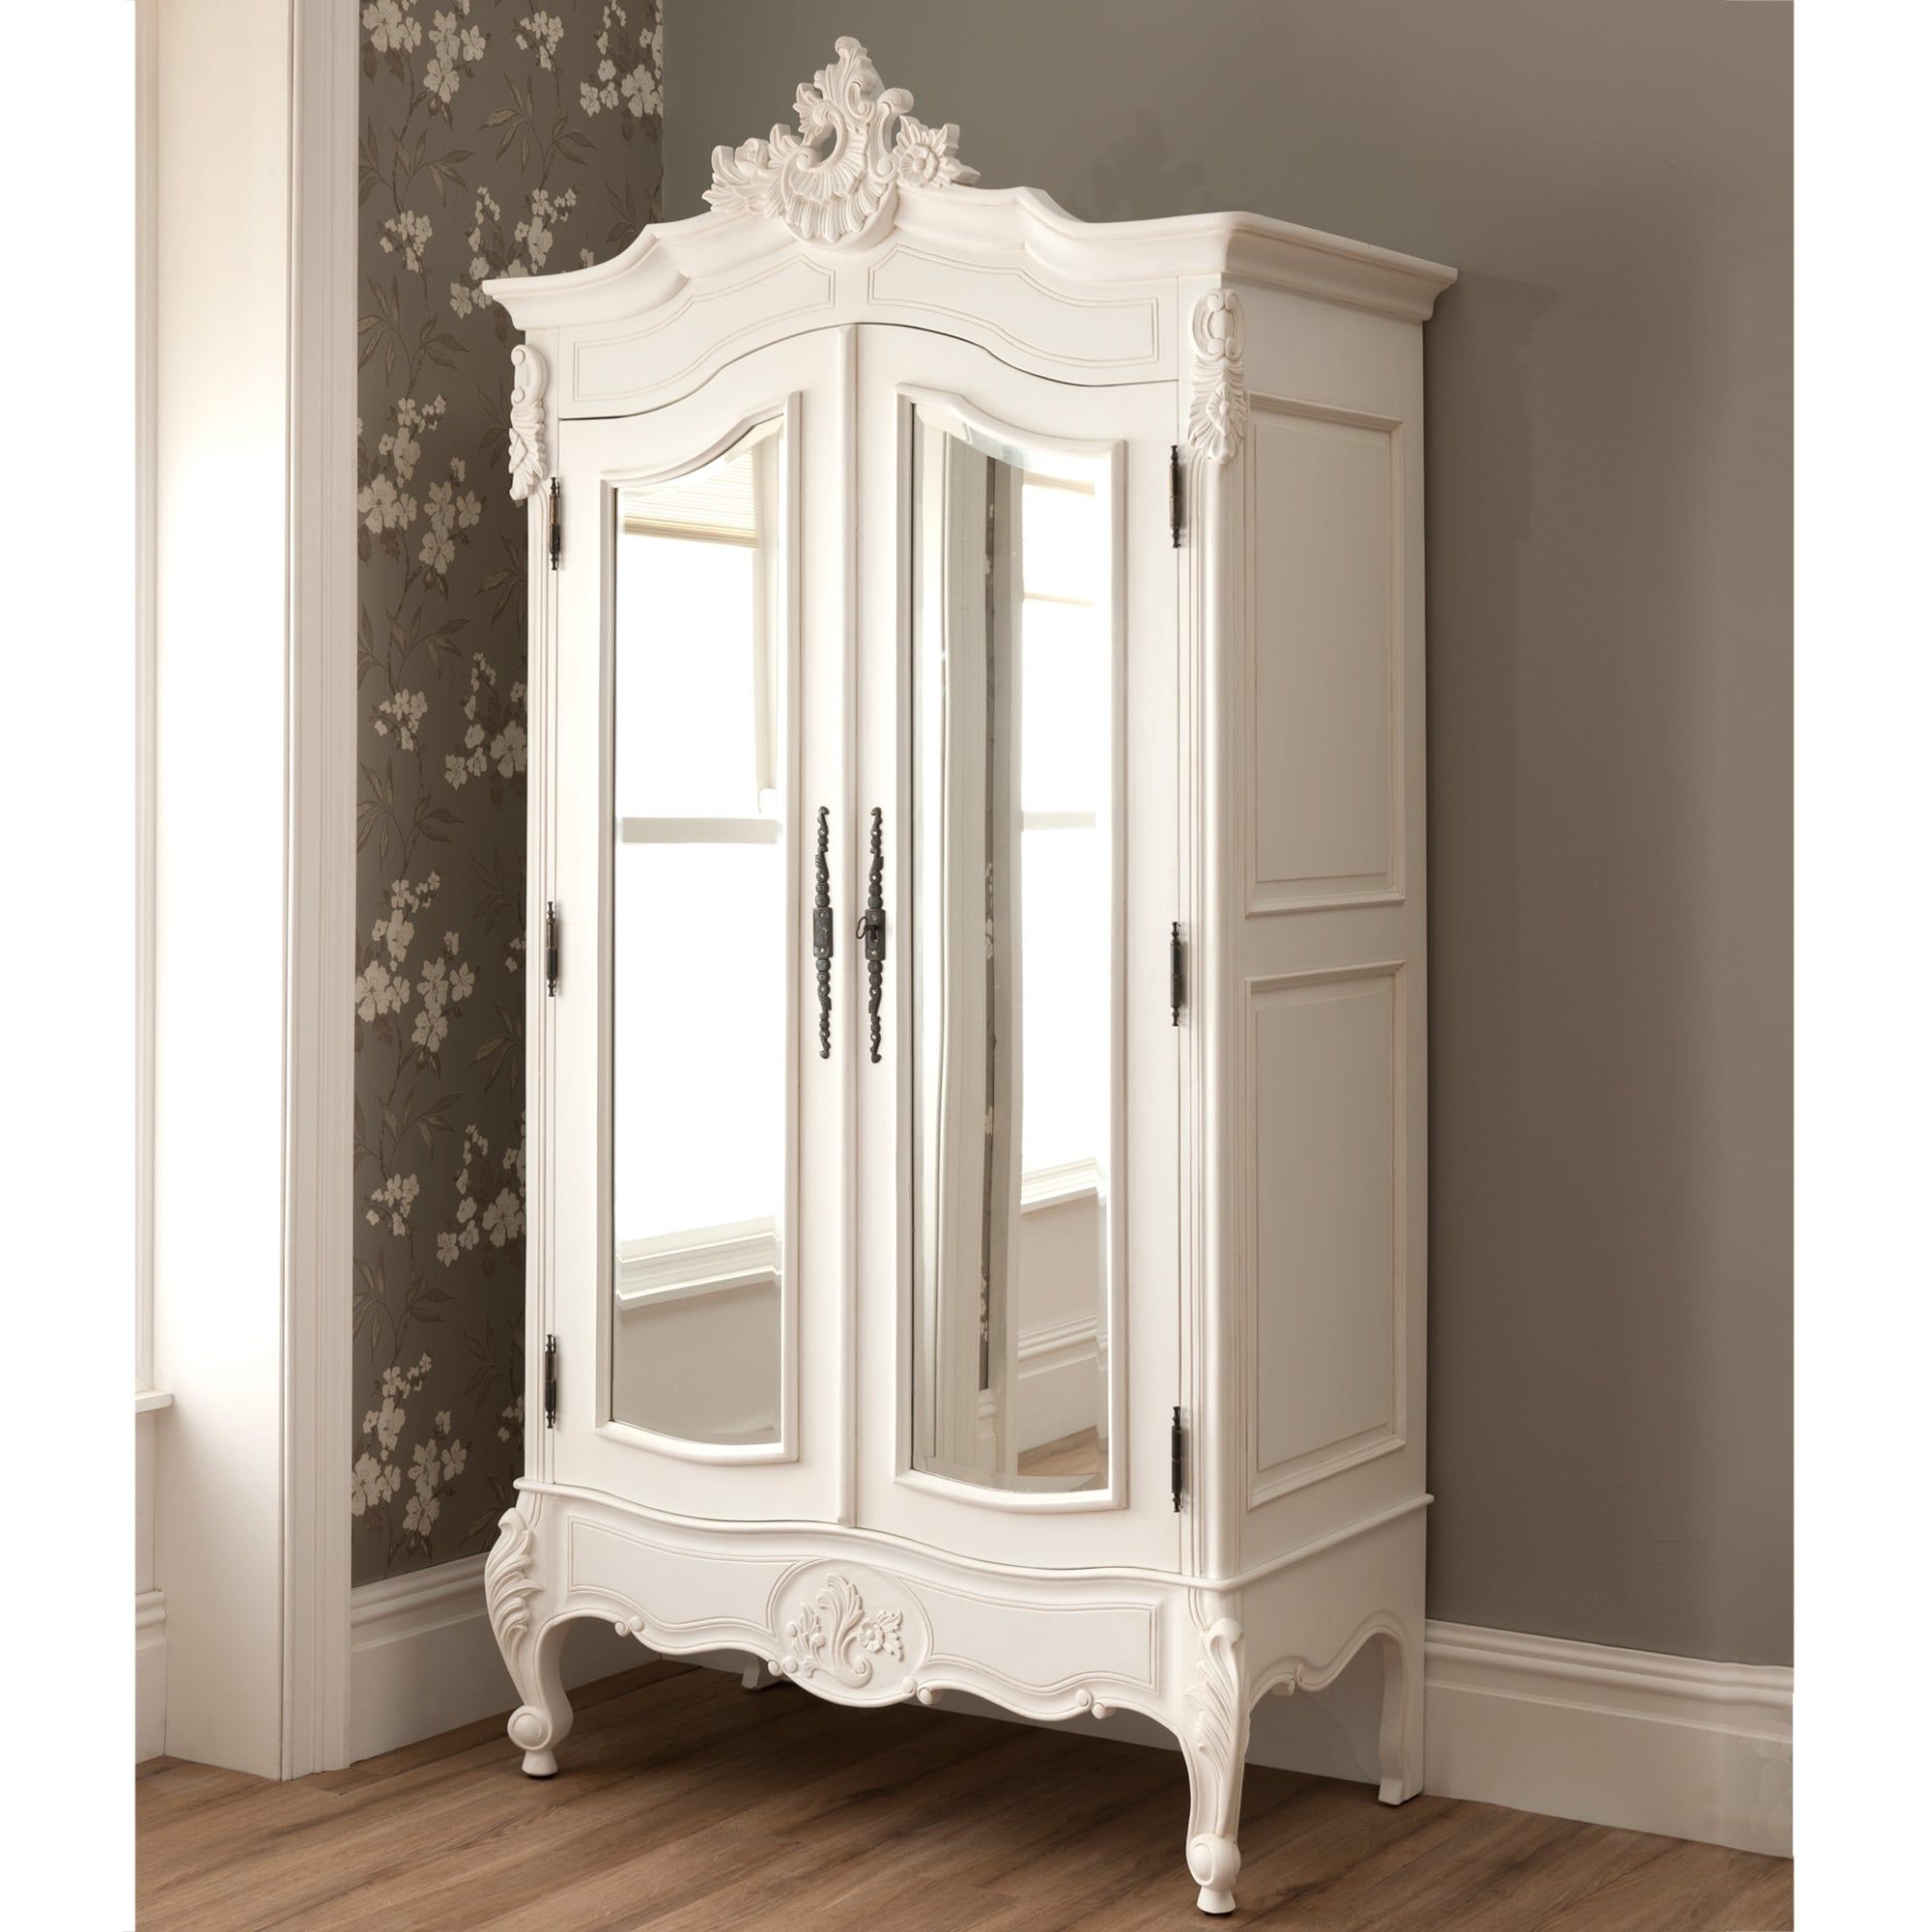 La Rochelle Antique French Mirrored 2 Door Wardrobe Throughout Ornate Wardrobes (View 2 of 15)